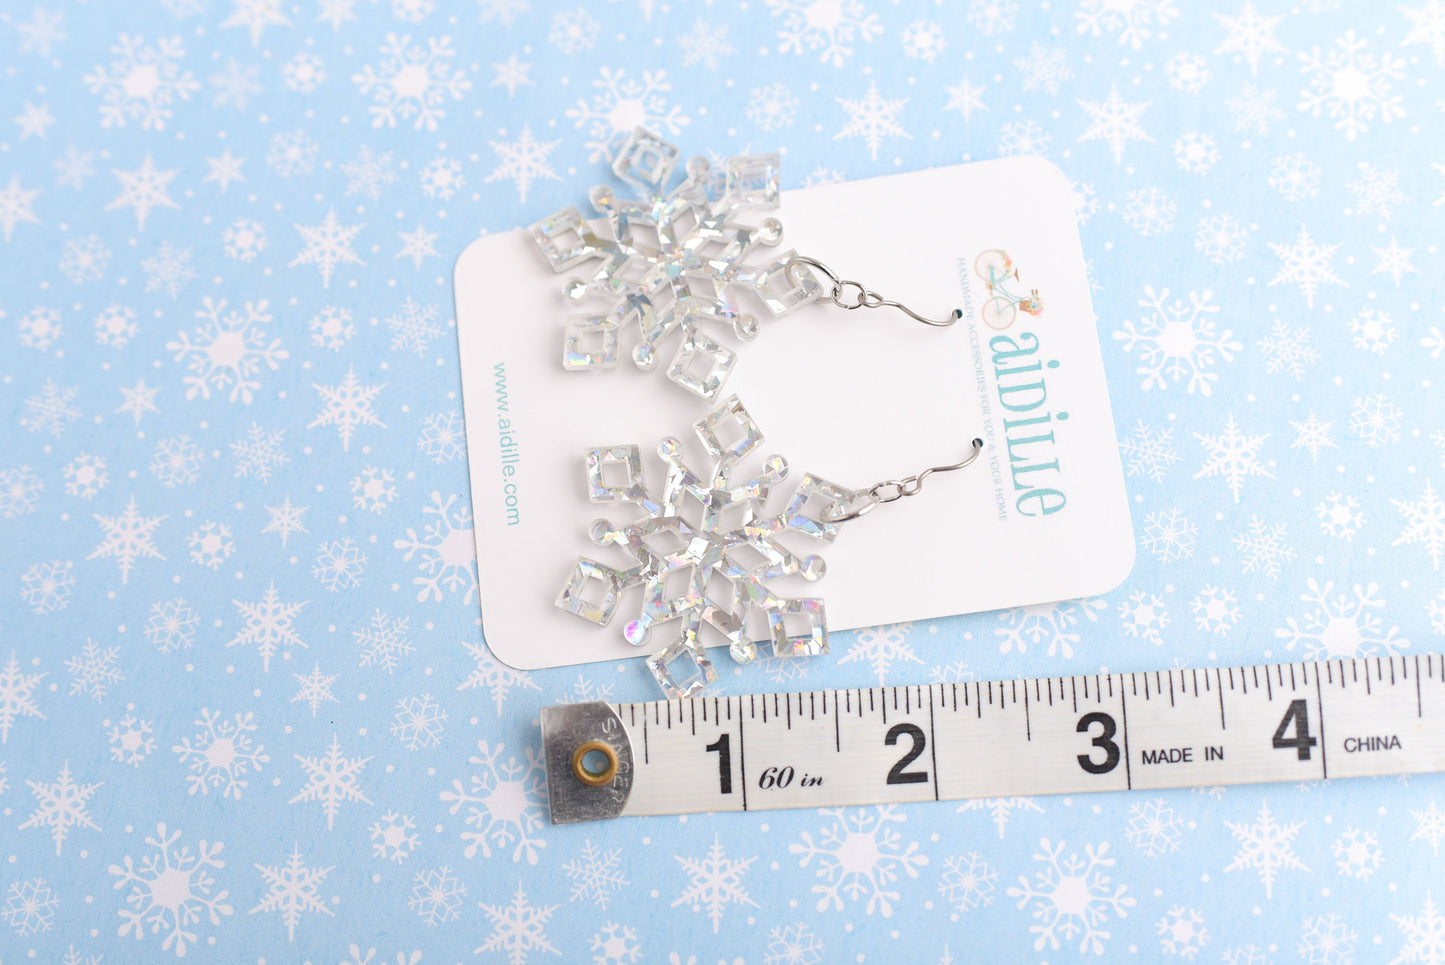 Acrylic Large Silver Snowflake Dangles with Titanium Ear Wires